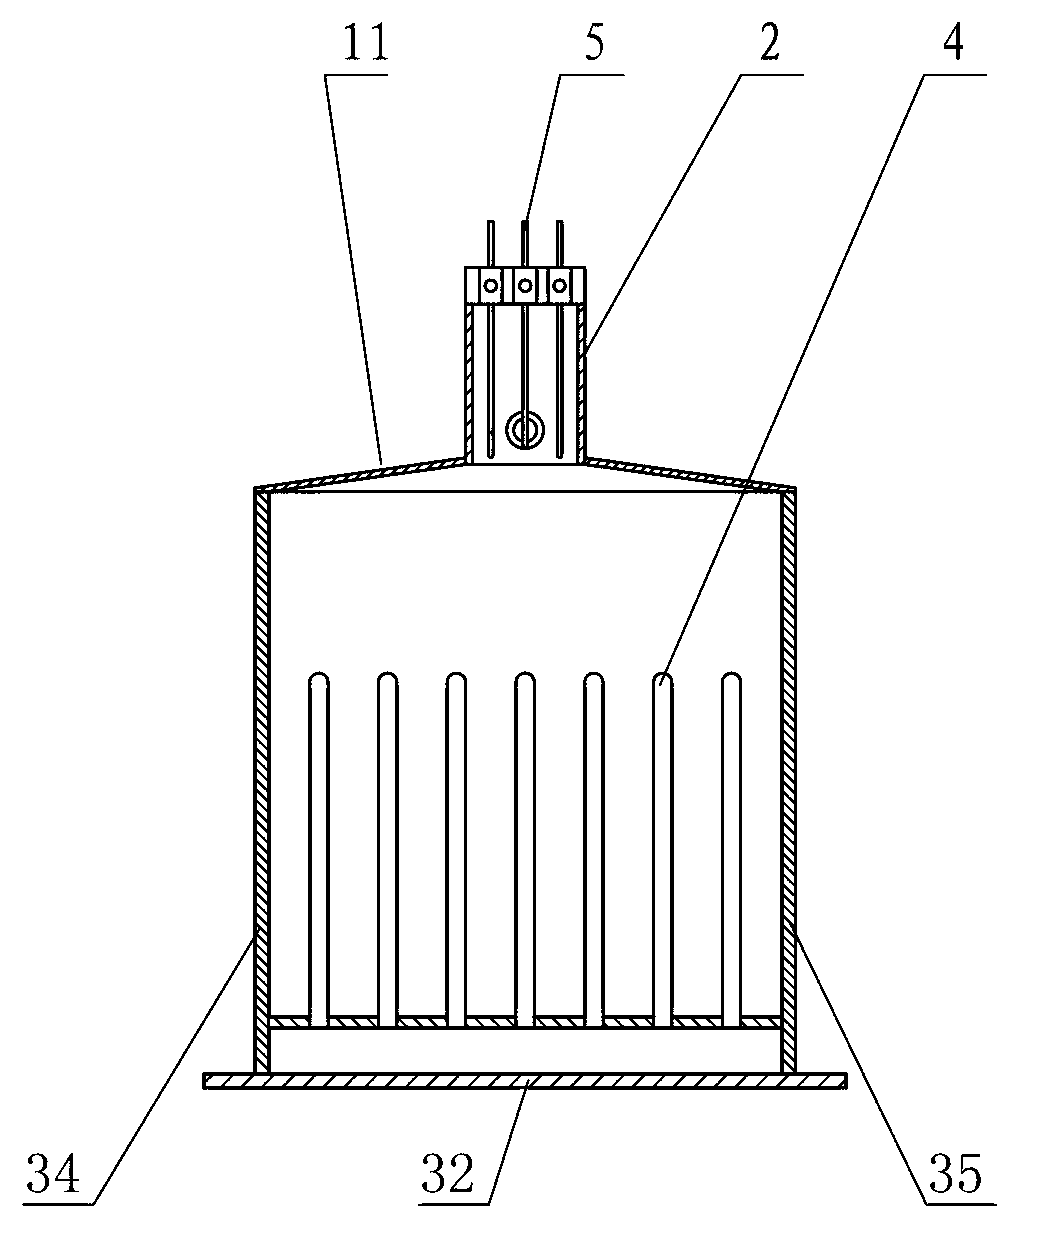 Oil-water separating device for separation and recovery of thin oil film